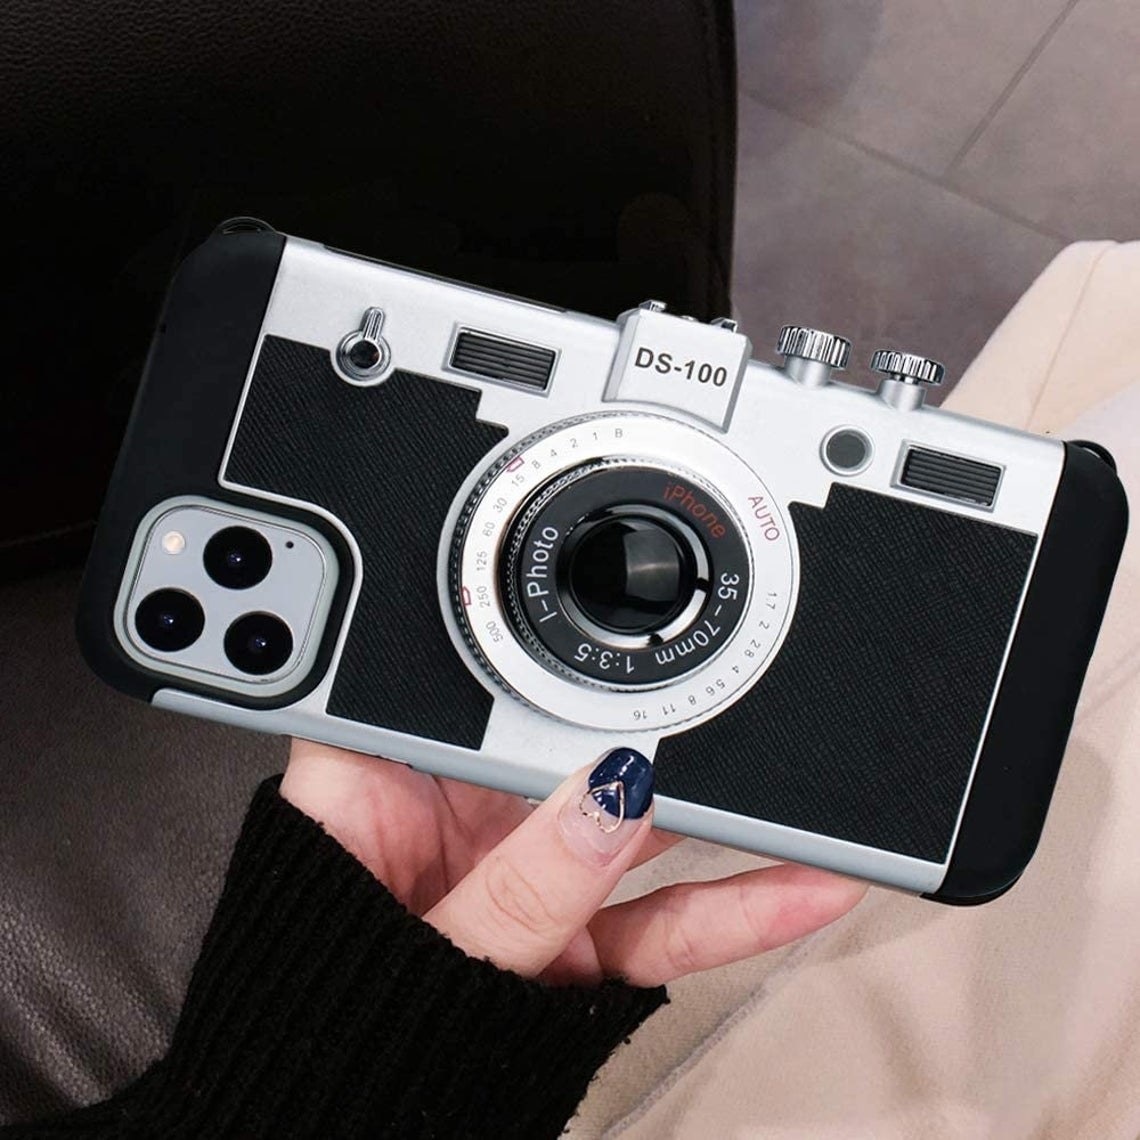 An iPhone case designed to look like a vintage camera with a camera lens and buttons